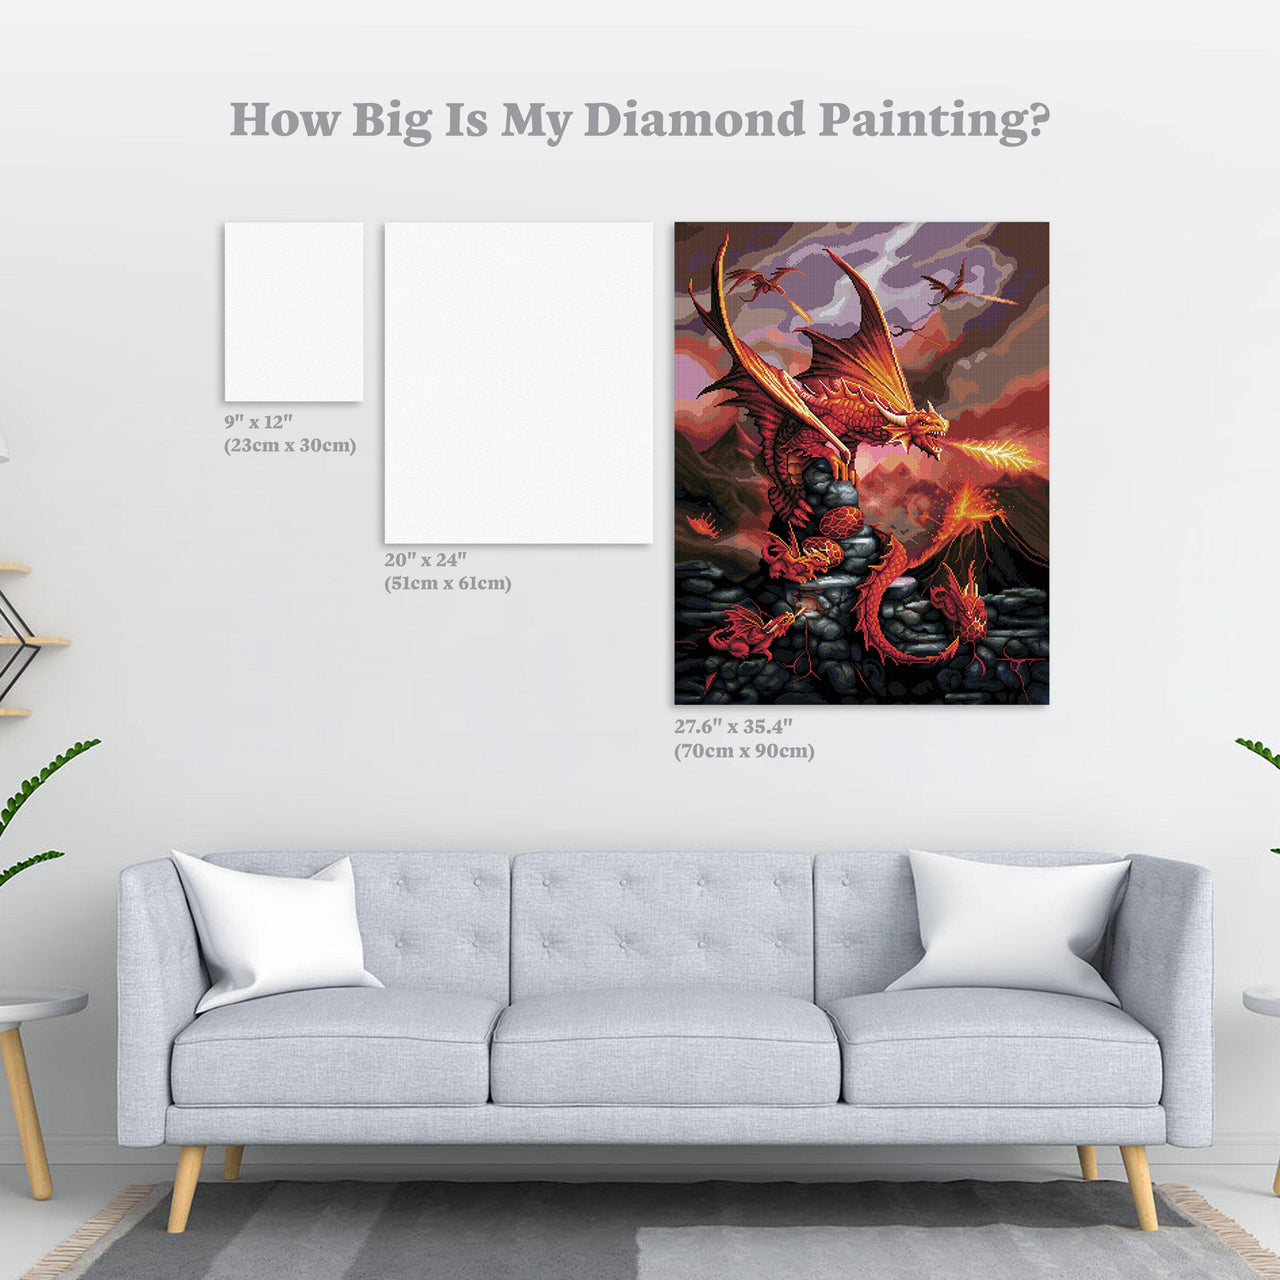 Diamond Painting Fire Dragon 27.6" x 35.4" (70cm x 90cm) / Square with 57 Colors and 5 ABs / 98,889